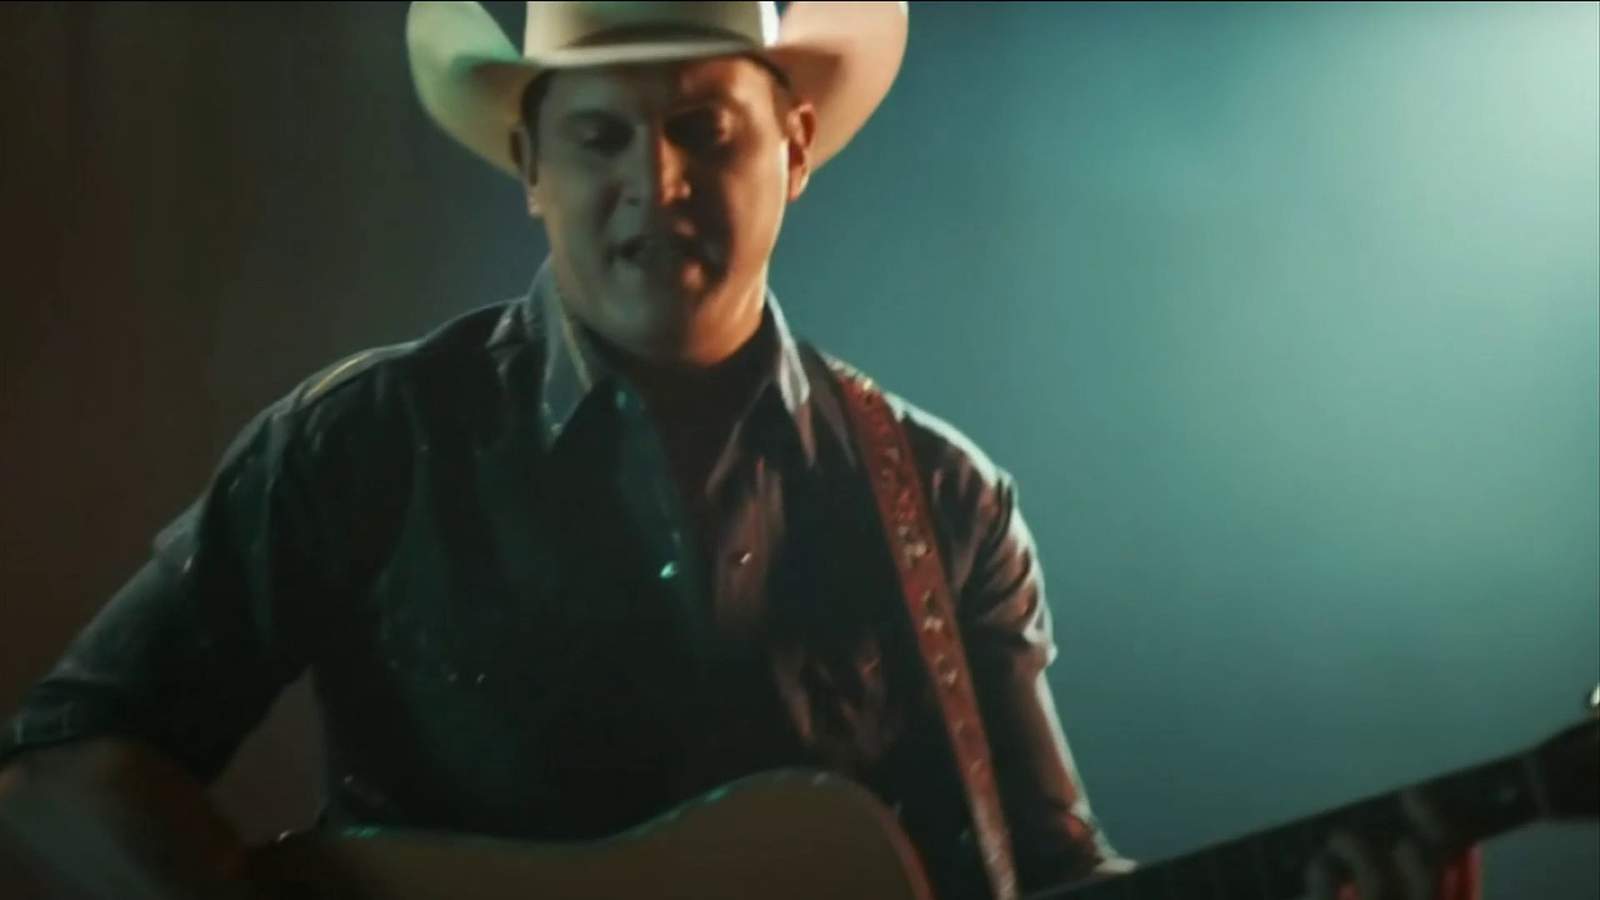 Jon Pardi performs Jacksonville’s first ever drive-in concert